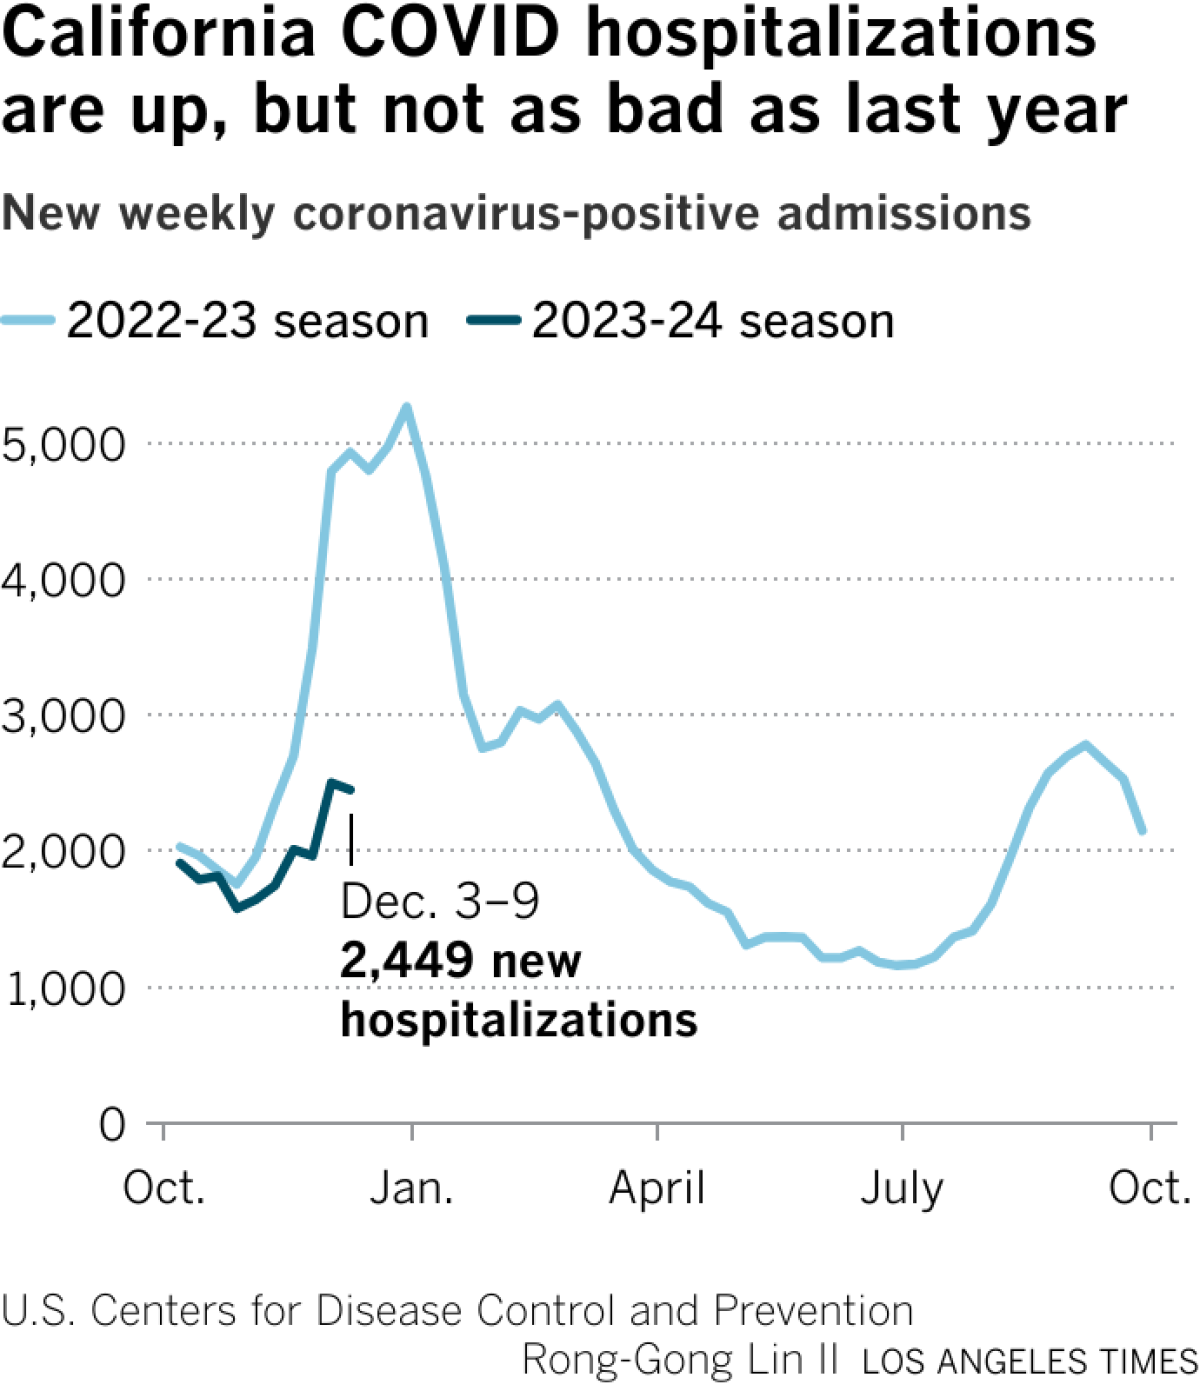 Line chart compares COVID hospitalization rates of the 2023-24 season with the previous. For the week ending on Dec. 9, there were 2,449 new hospitalizations.